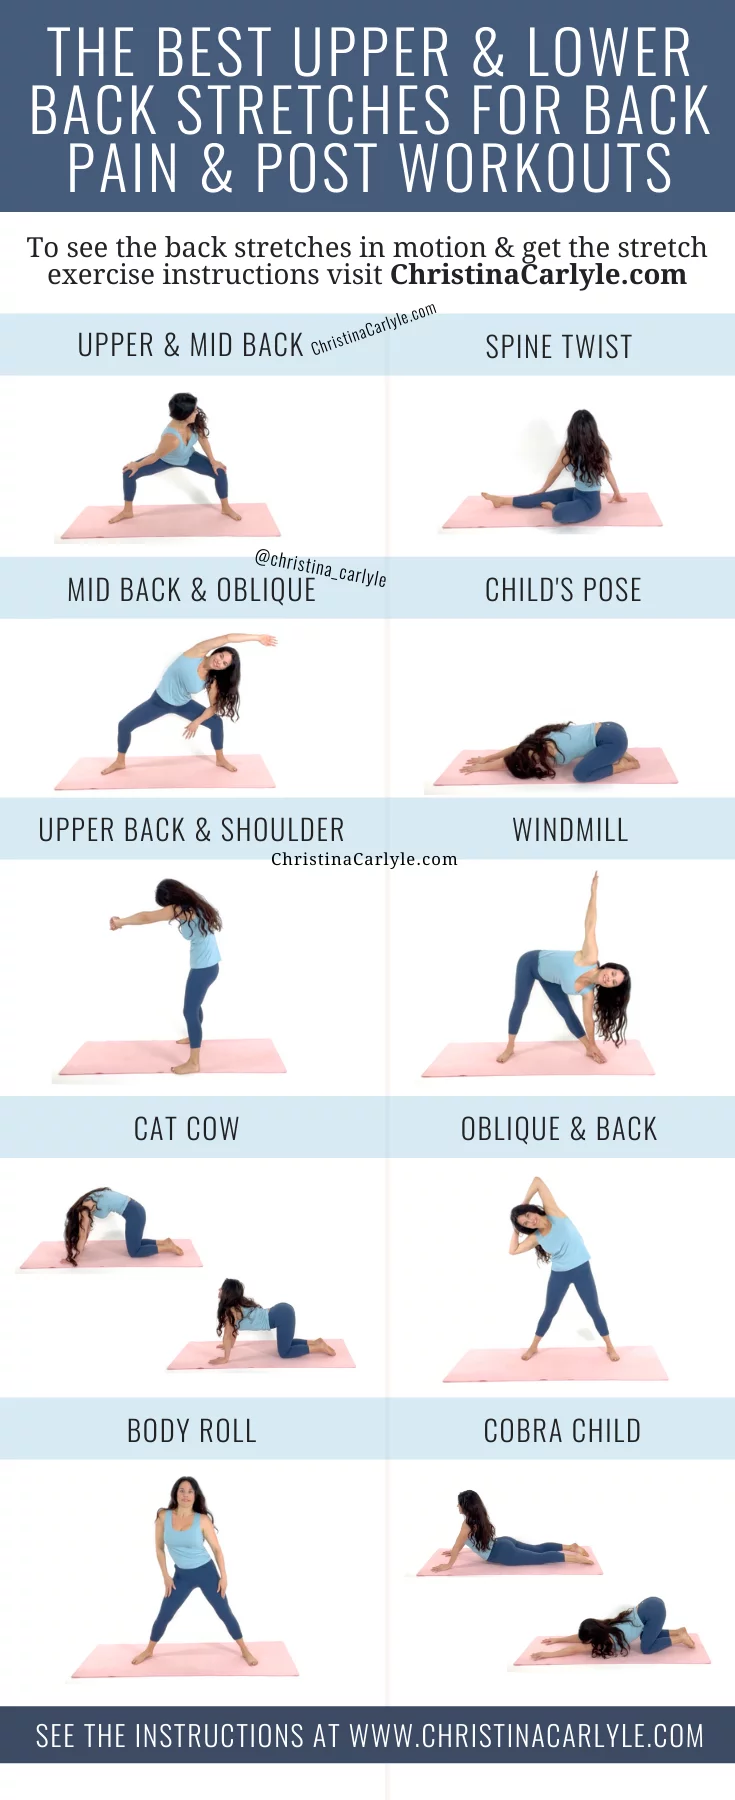 Yoga Poses to Help with Back Pain | Sports and Spine Orthopaedics